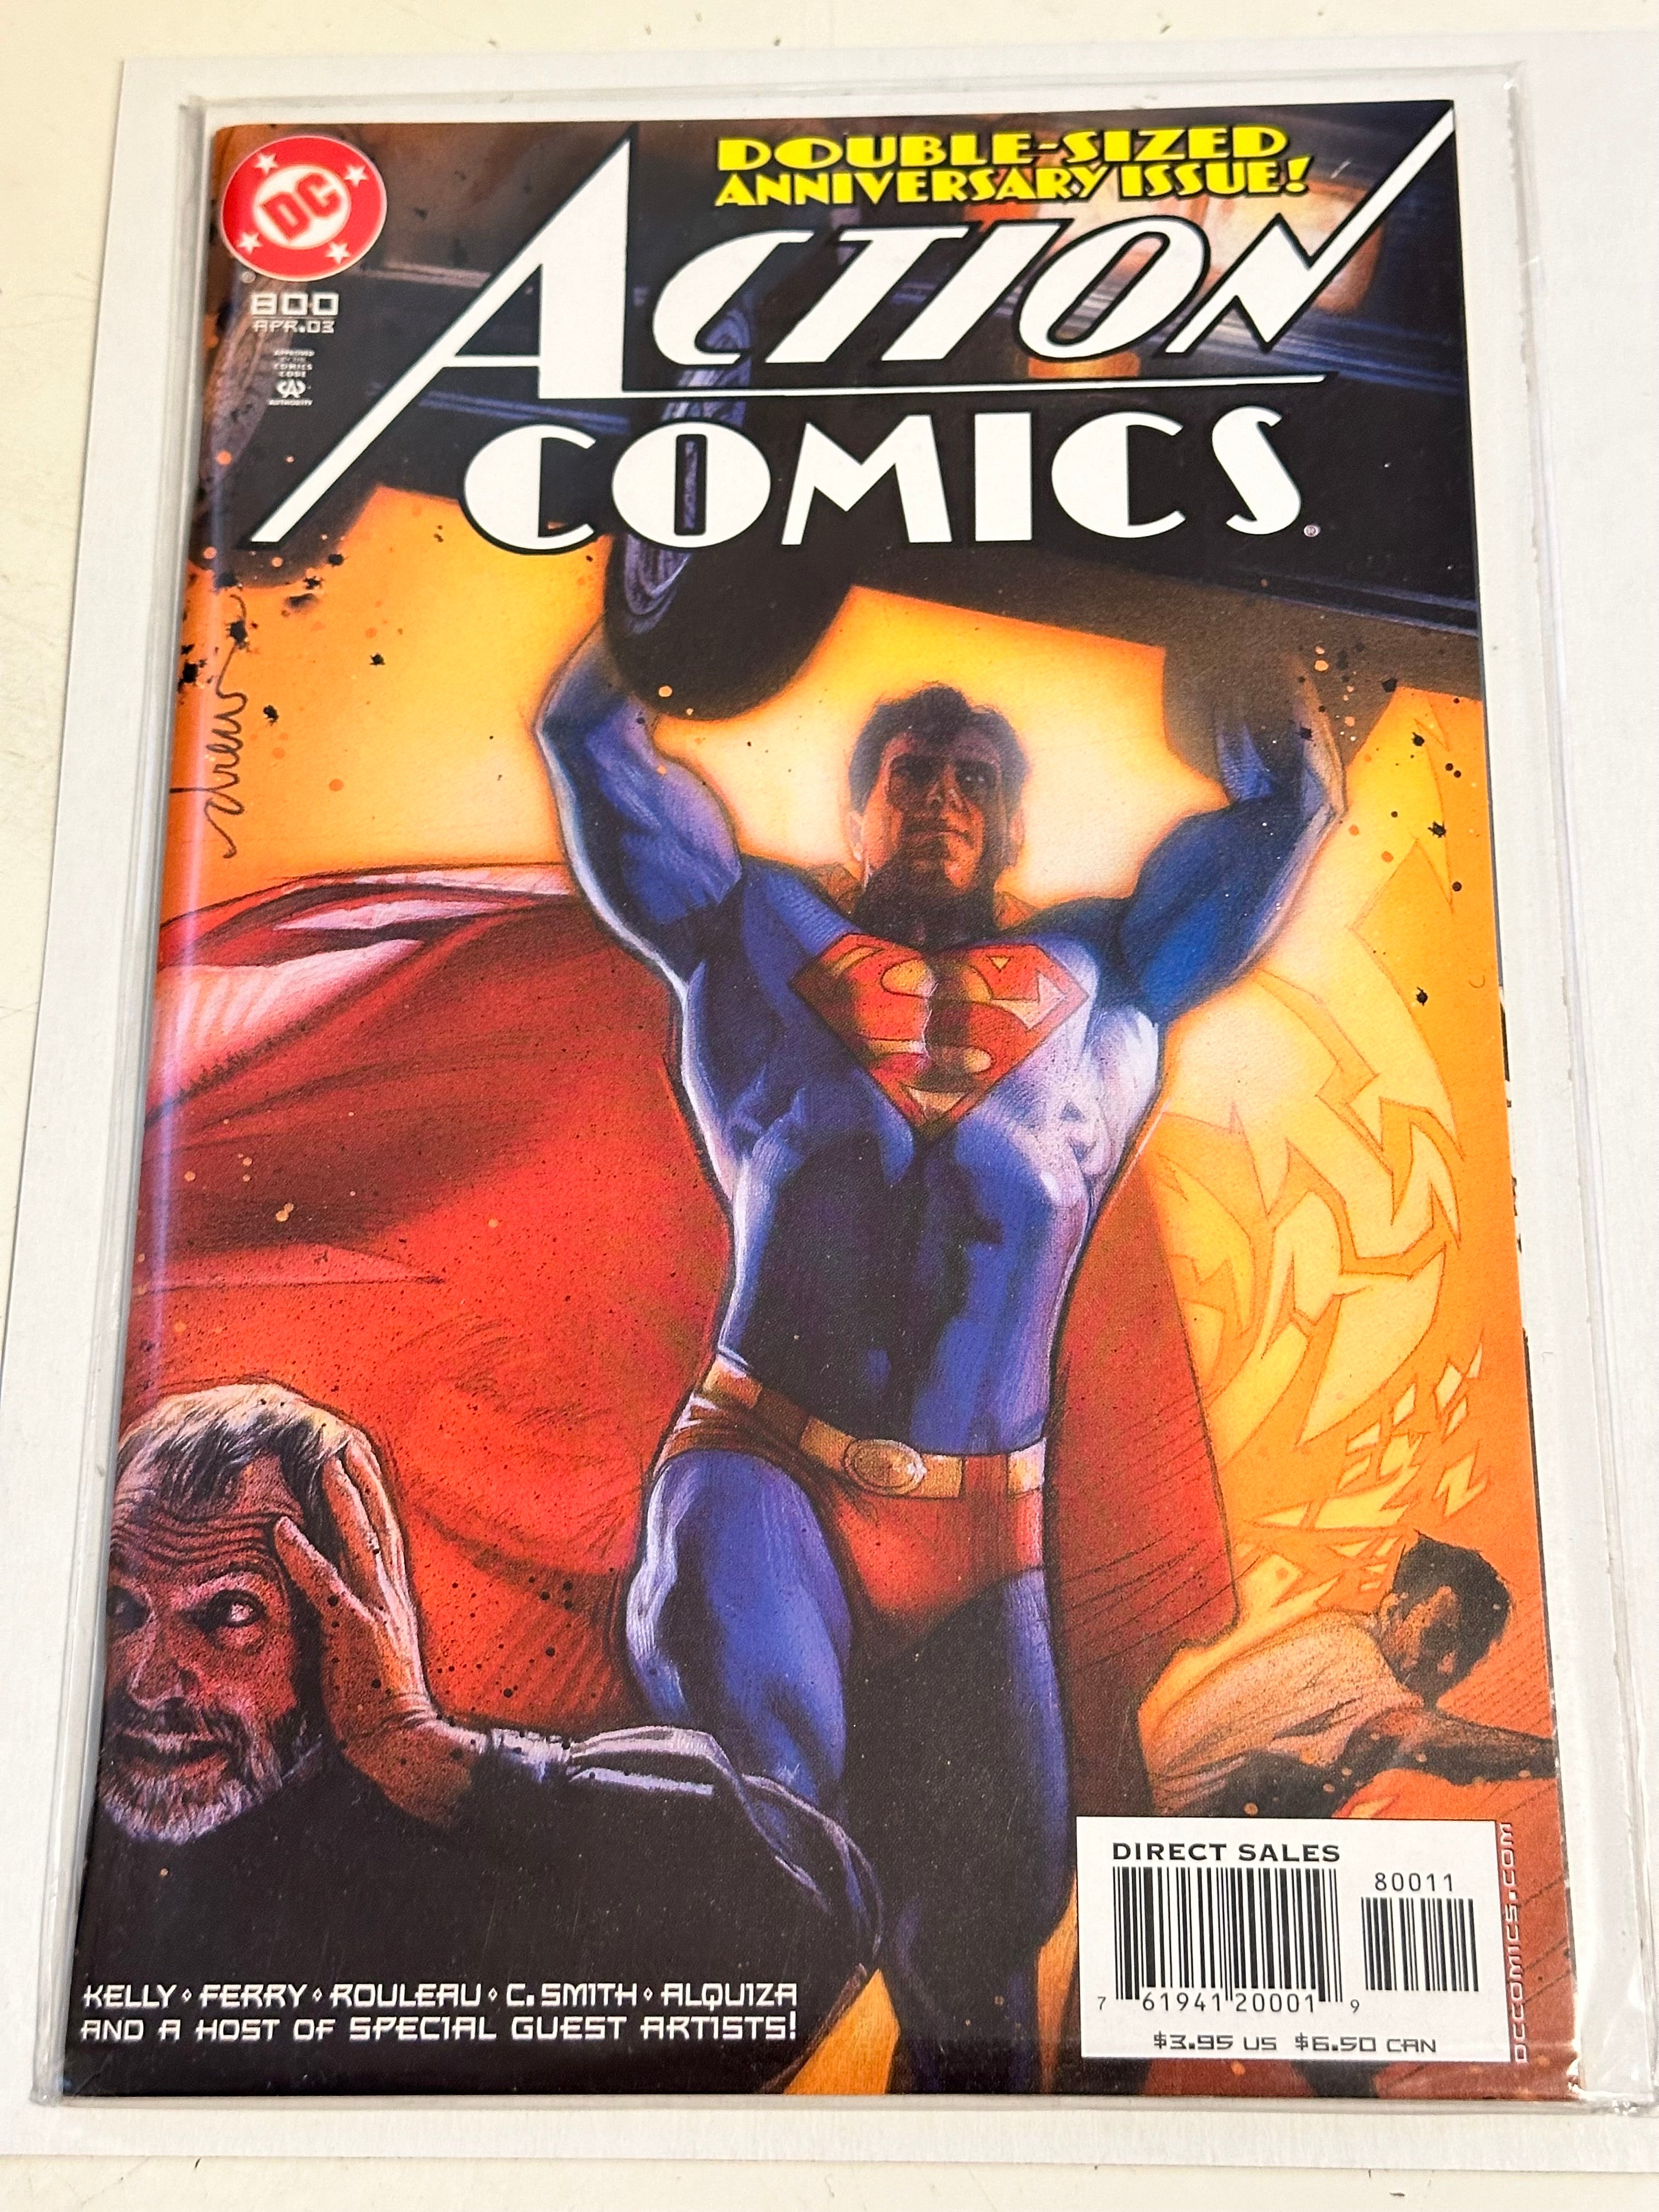 Superman issue 800 from 2003